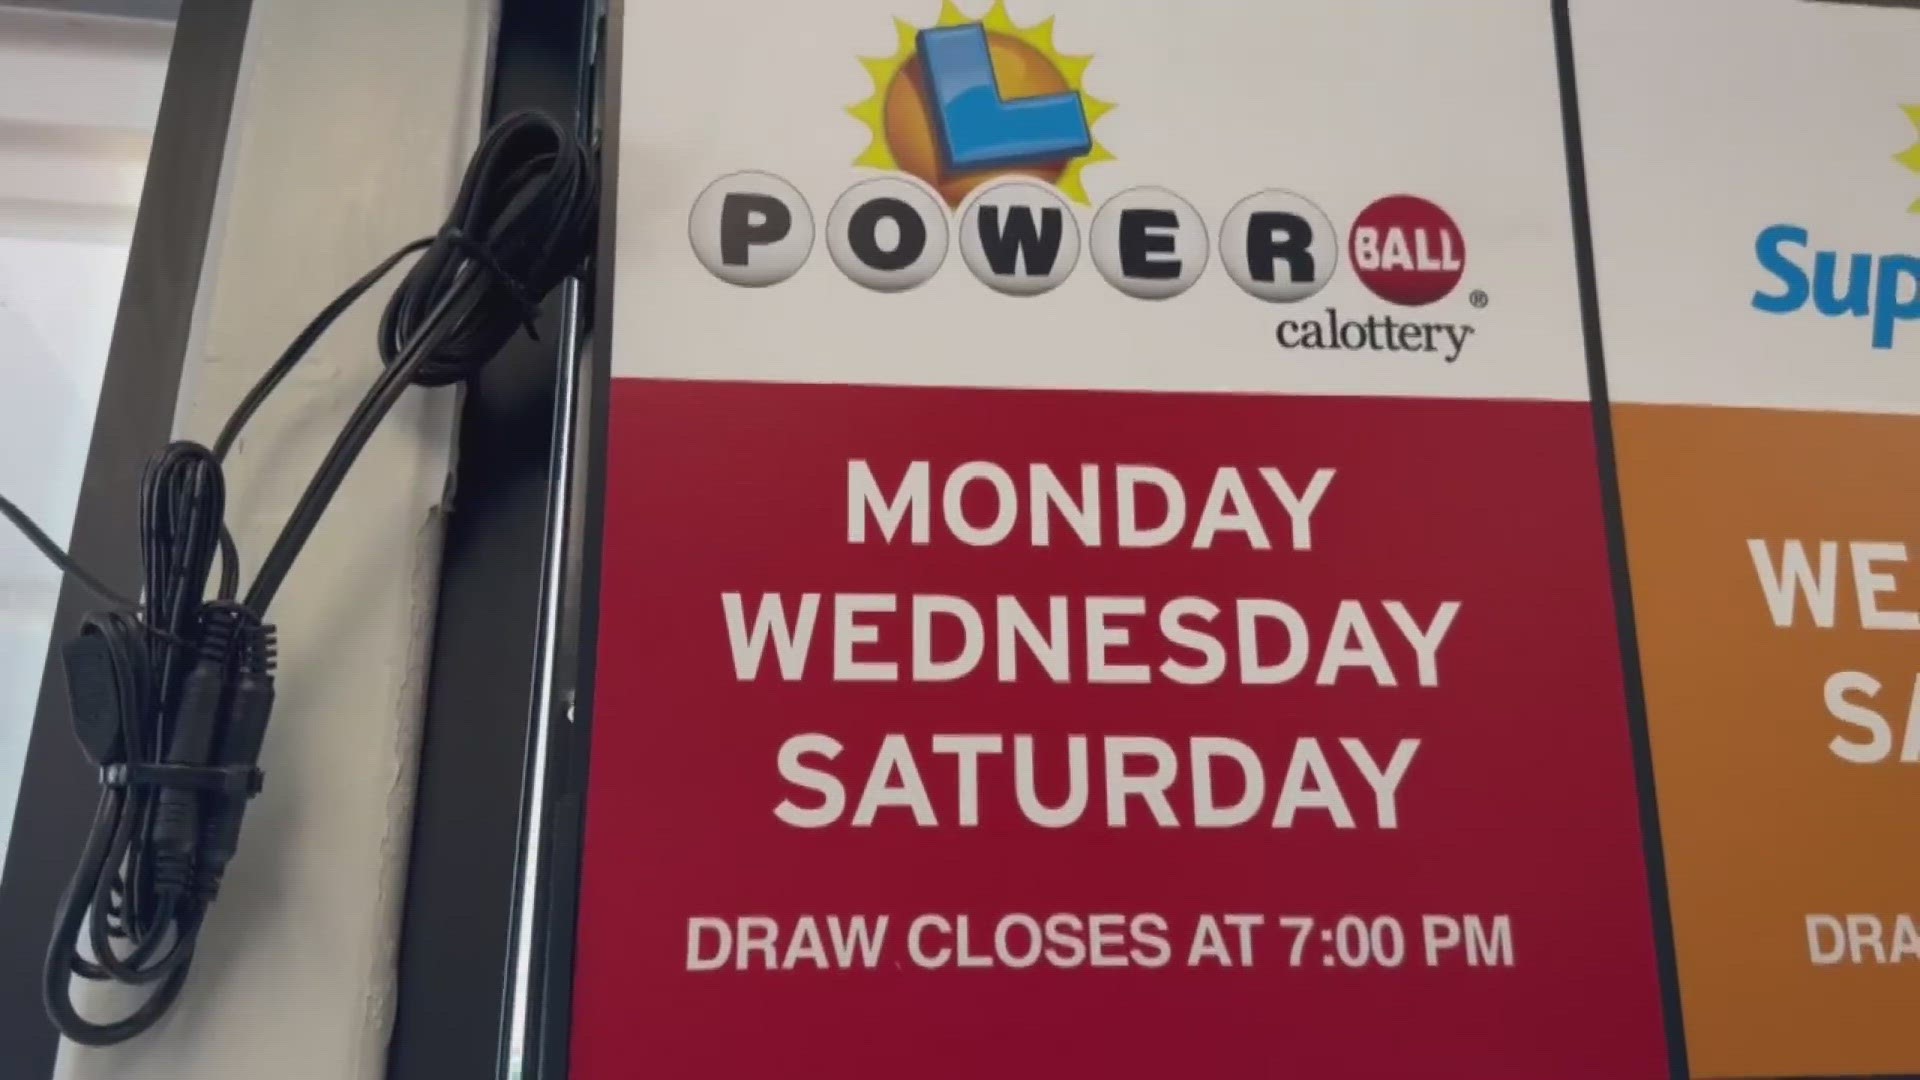 Someone hit the jackpot in the Powerball drawing in California. We don't know who yet, but the night proved big for many lotto players.